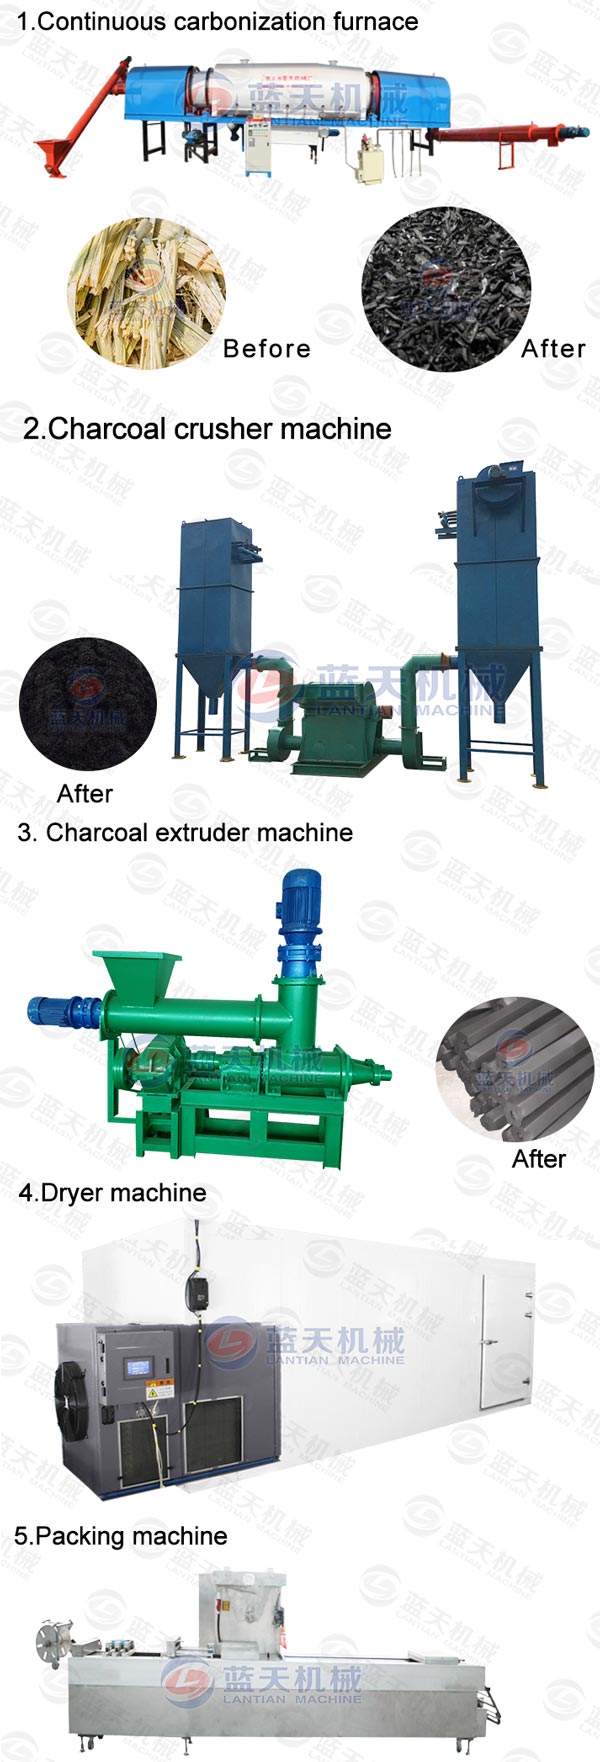 Product line of charcoal briquette extruder